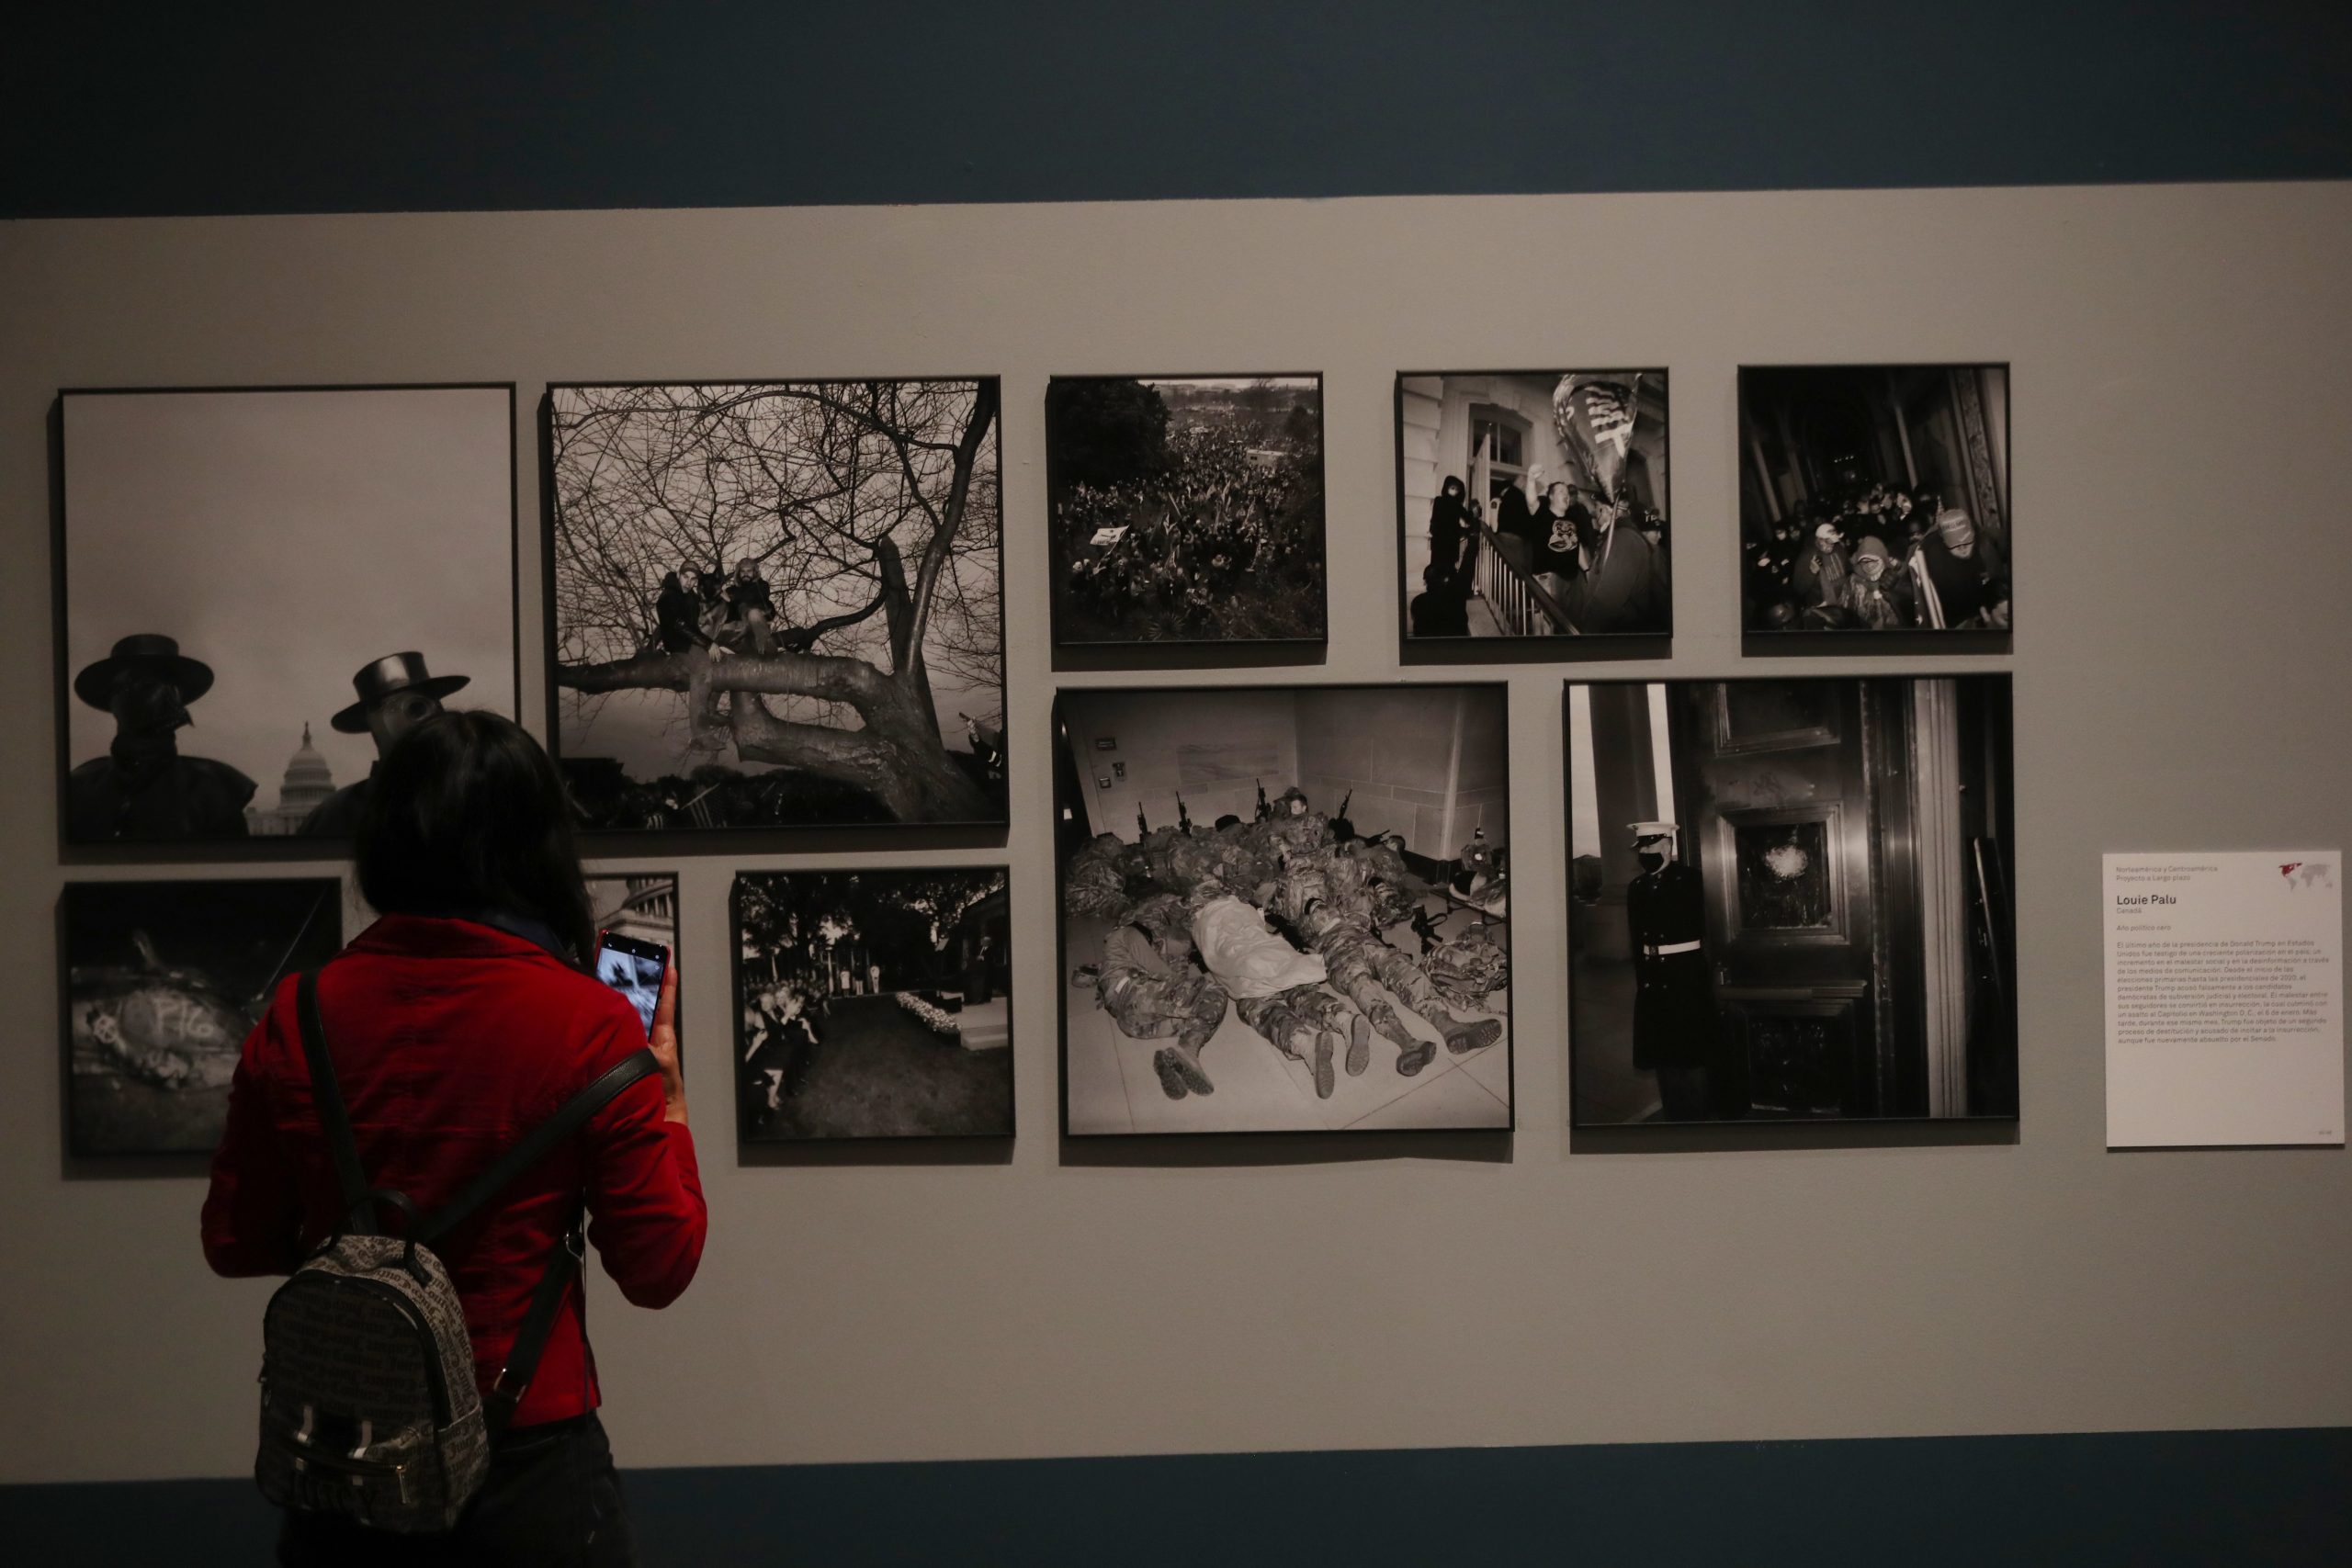 World Press Photo arrives in Mexico with a risk for journalists